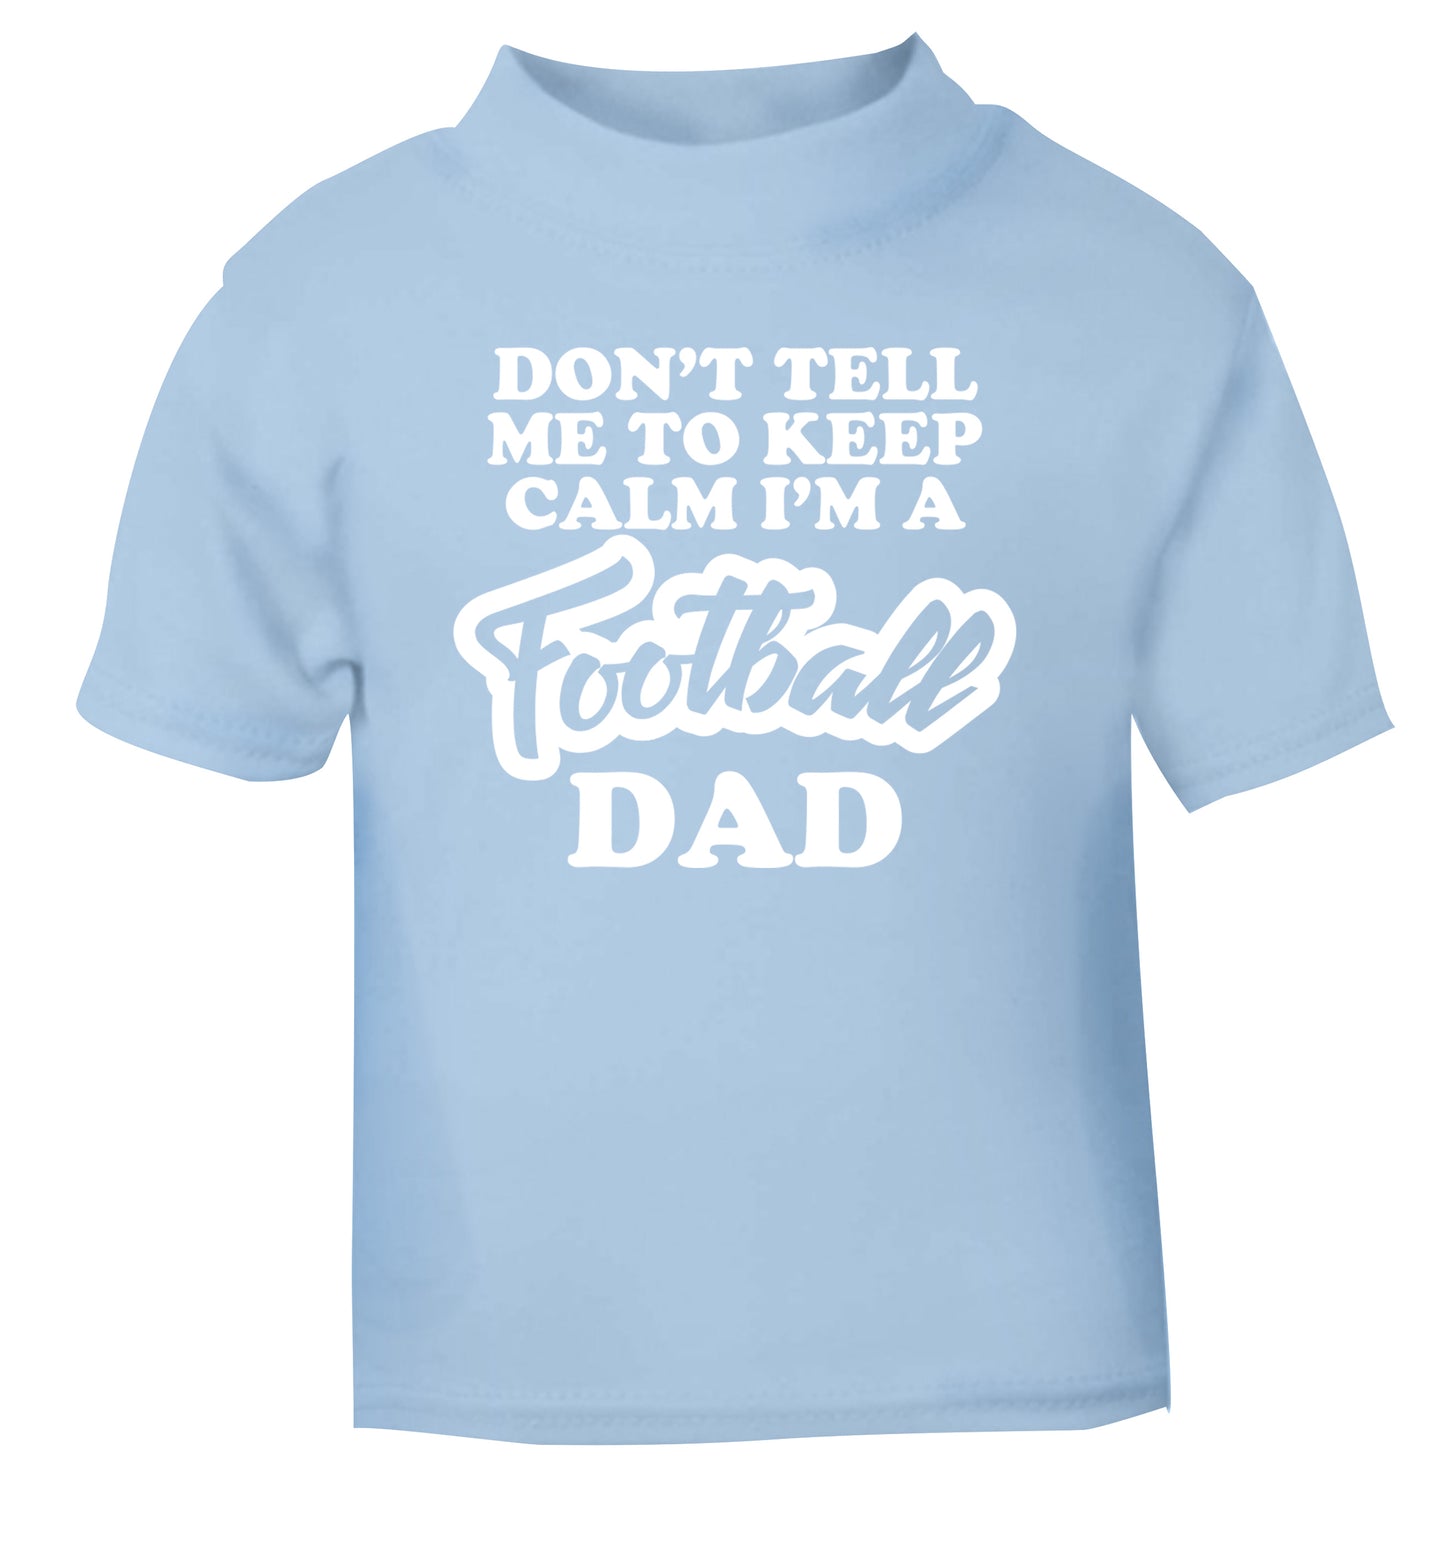 Don't tell me to keep calm I'm a football grandad light blue Baby Toddler Tshirt 2 Years